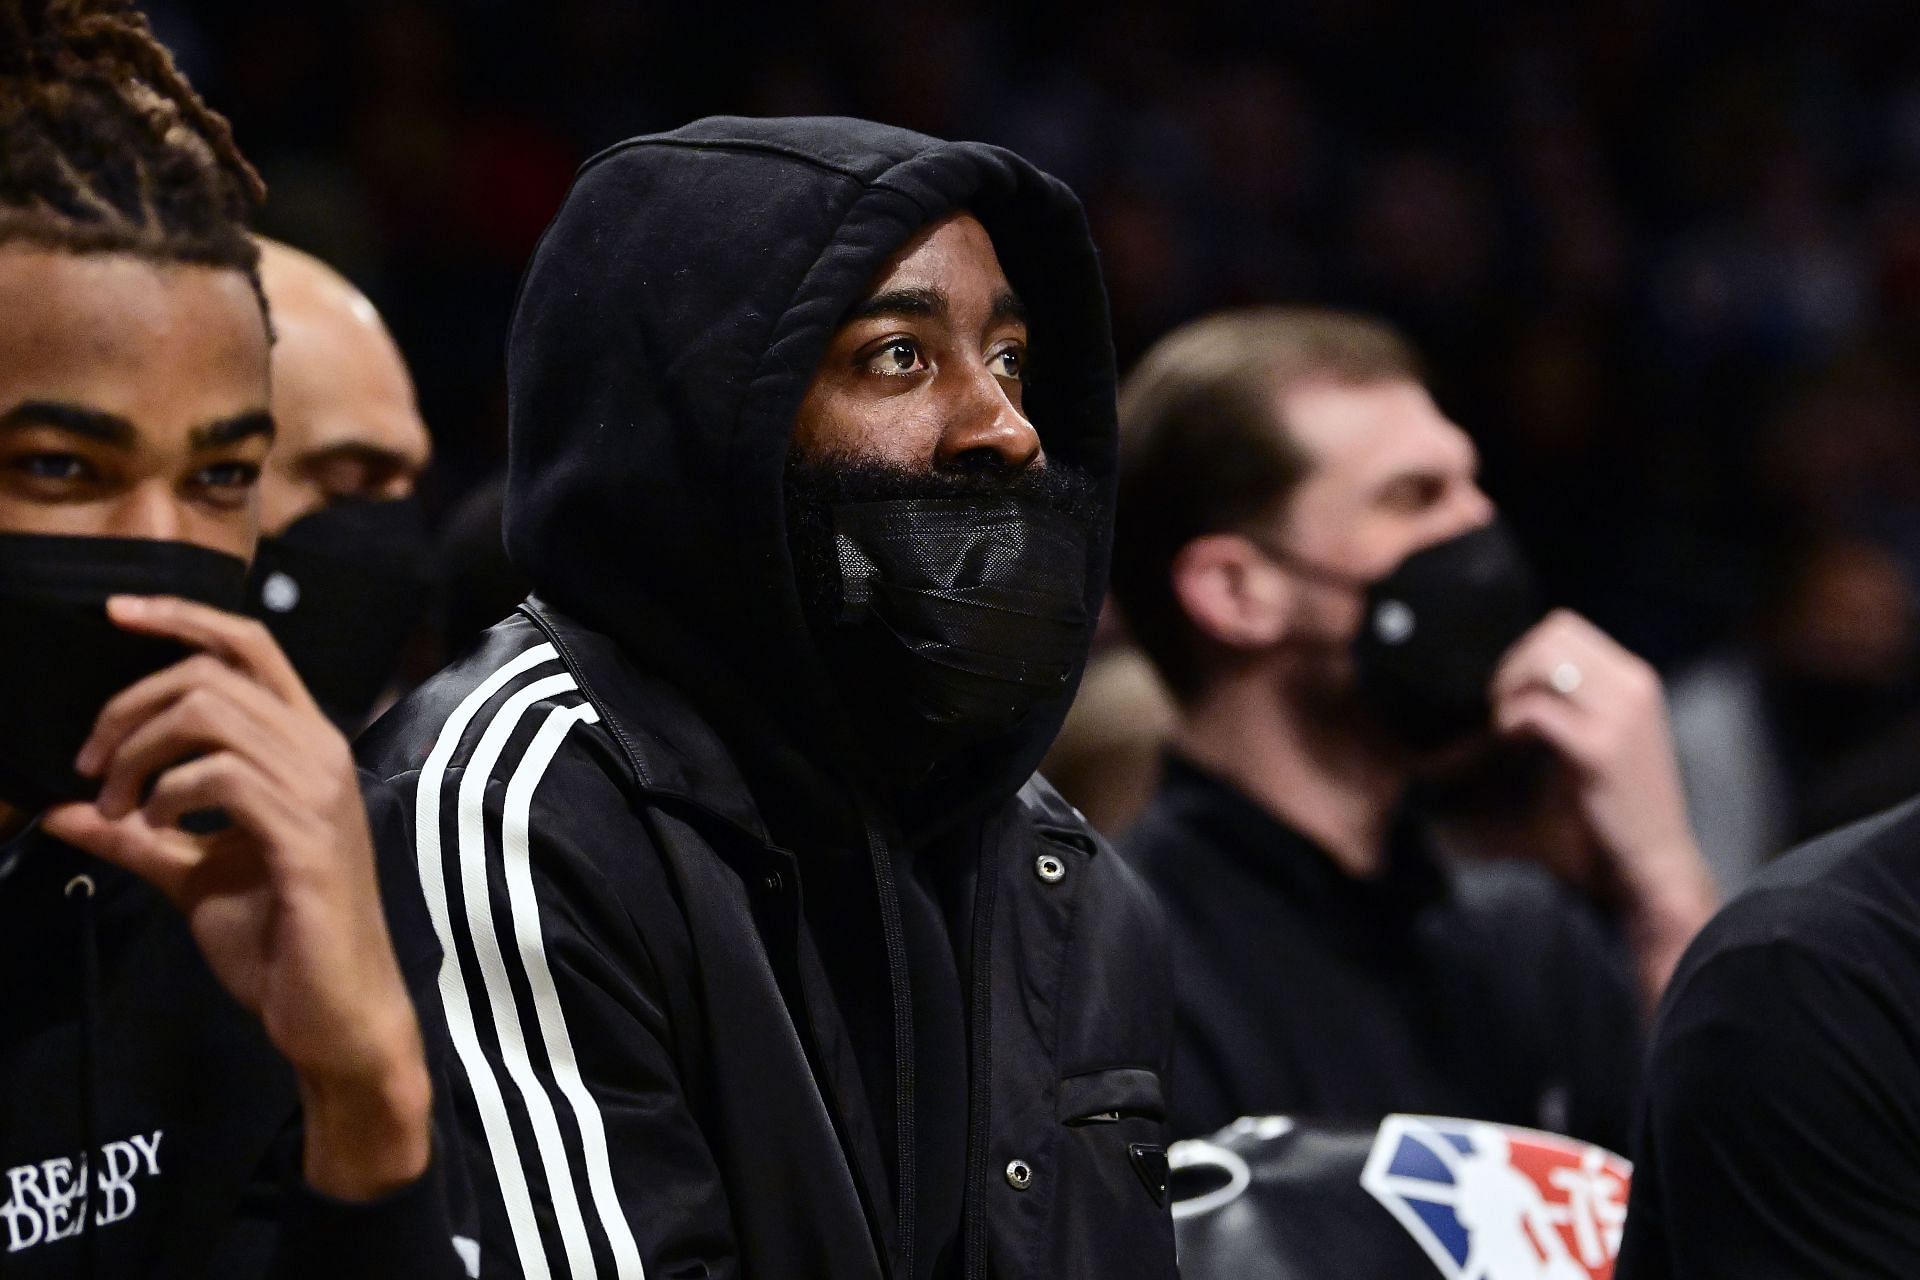 James Harden will be hoping to put an end to his search for an NBA championship this season.